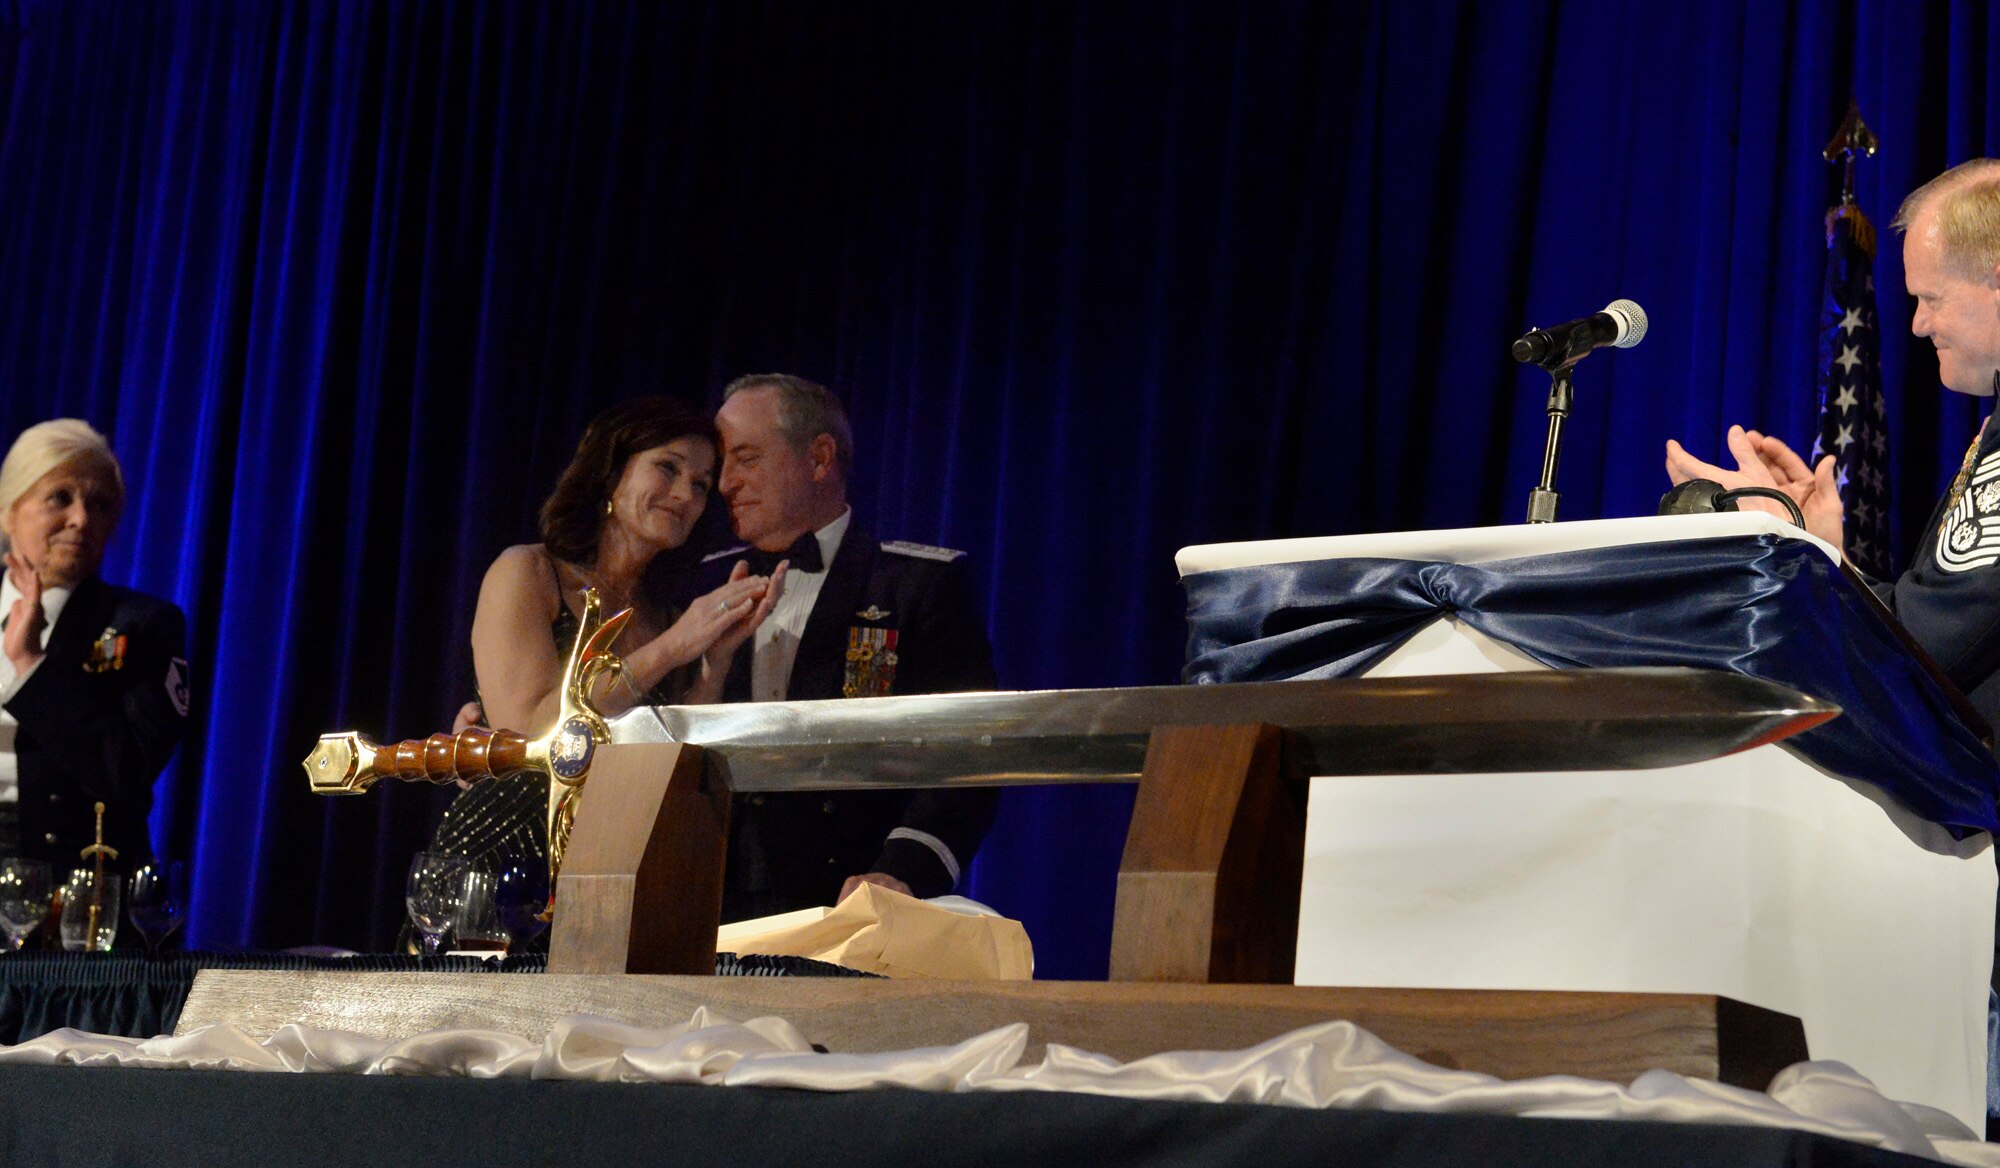 Air Force Chief of Staff Gen. Mark A. Welsh III, with his wife, Betty, is honored with the Order of the Sword, presented by Chief Master Sgt. of the Air Force James A. Cody during the Order of the Sword dining-in April 22, 2016, in Montgomery, Ala. The sword represents truth, justice and power, given to an individual who has proven to be a leader among leaders.  (U.S. Air Force photo/Scott M. Ash)